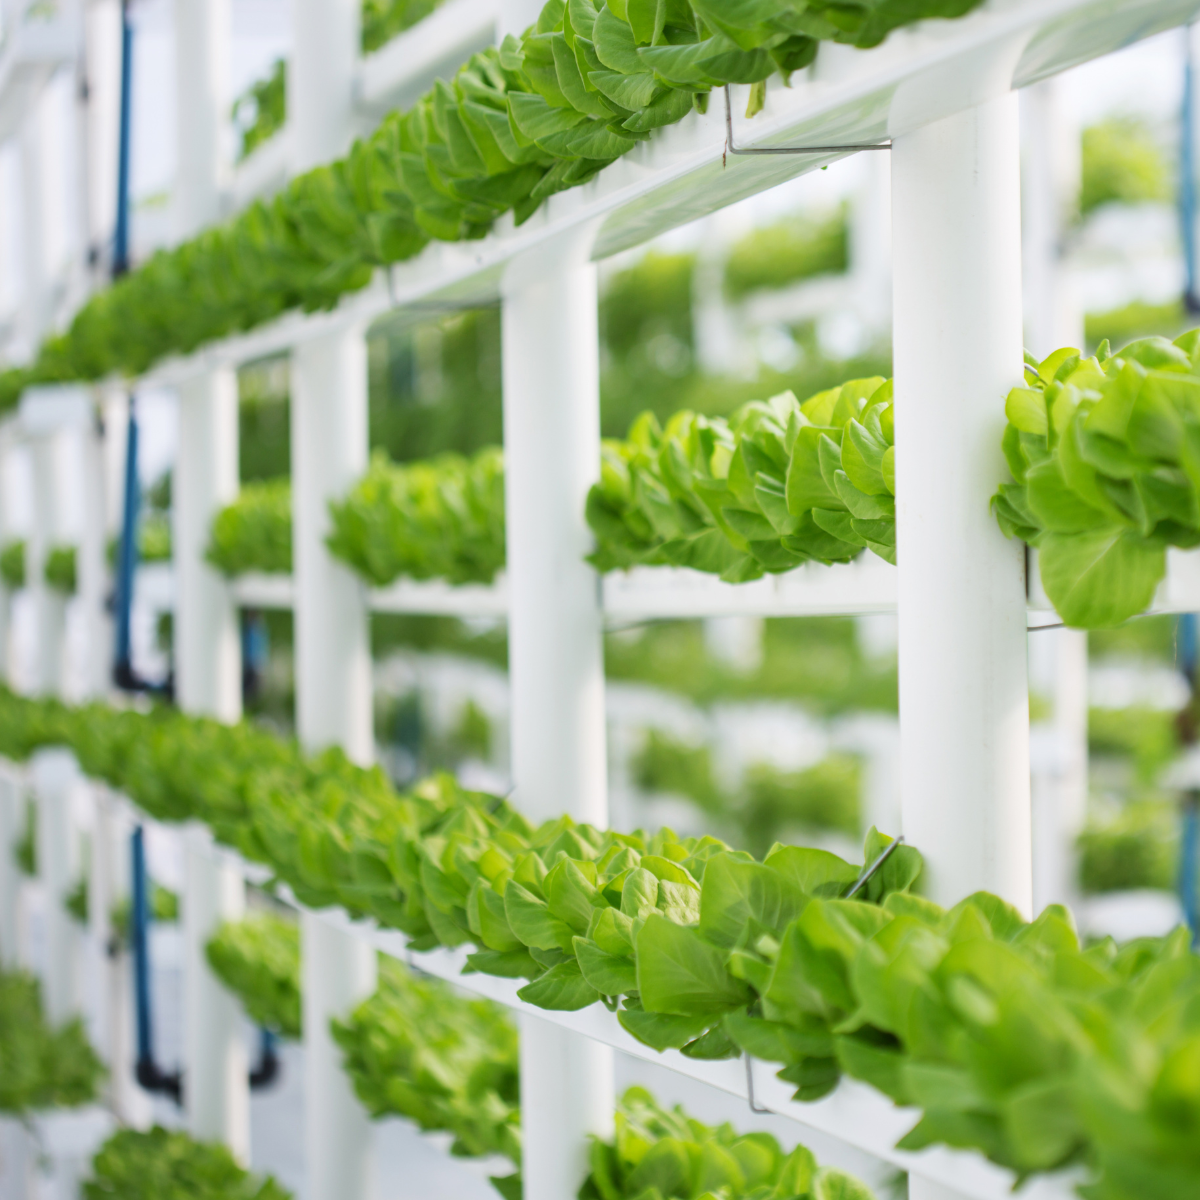 What Are Hydroponic Systems and How Do They Work?